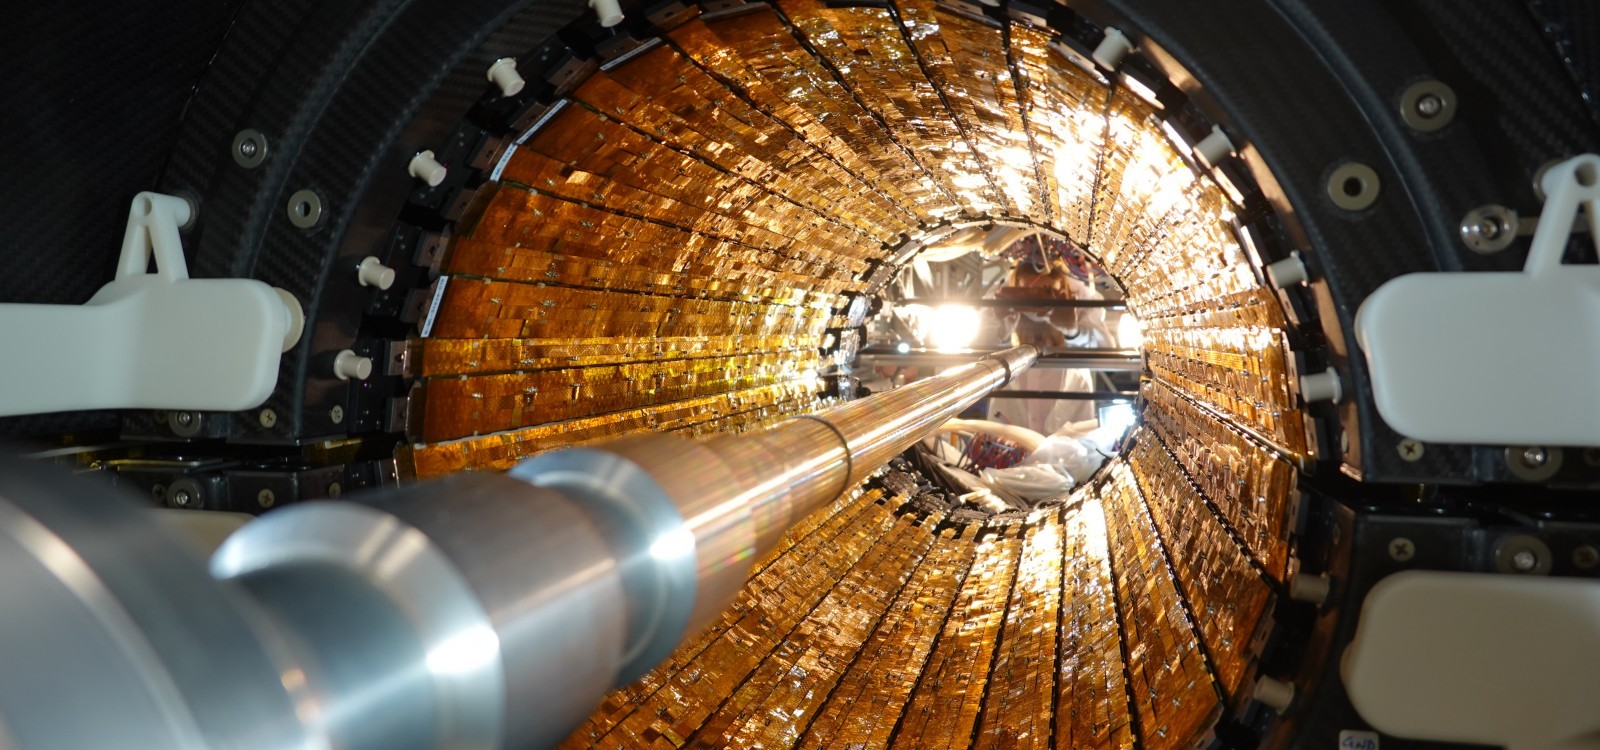 installation-of-the-outer-barrel-of-the-new-inner-tracking-system-of-the-alice-experiment-at-cern-c-cern.jpg